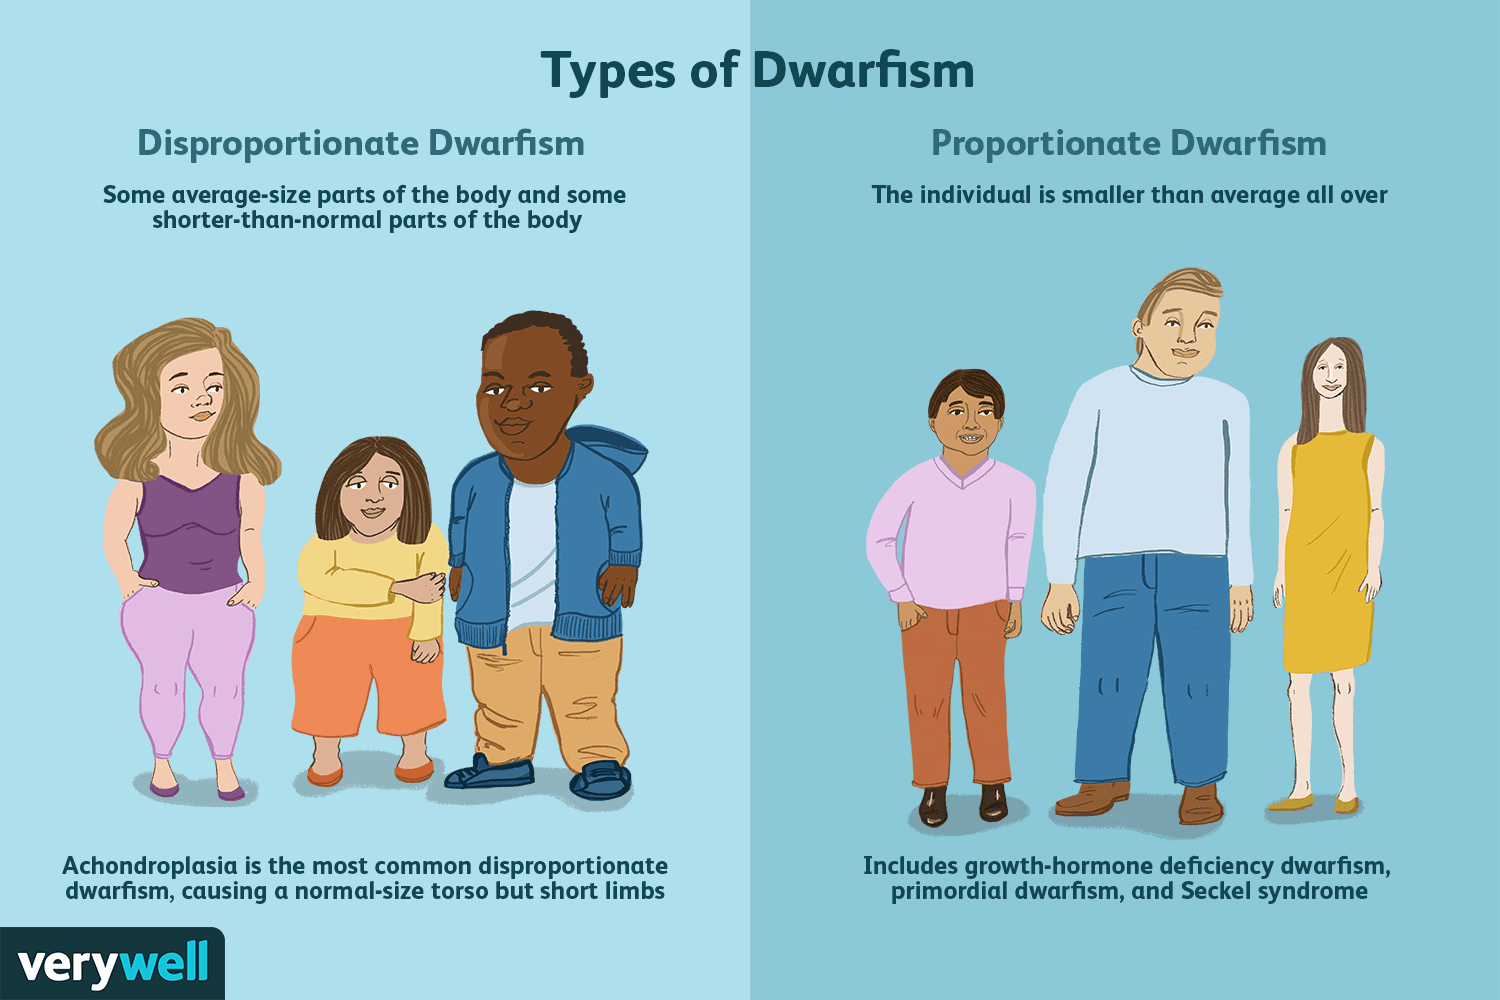 What is the difference between dwarfism and Disproportionate dwarfism?